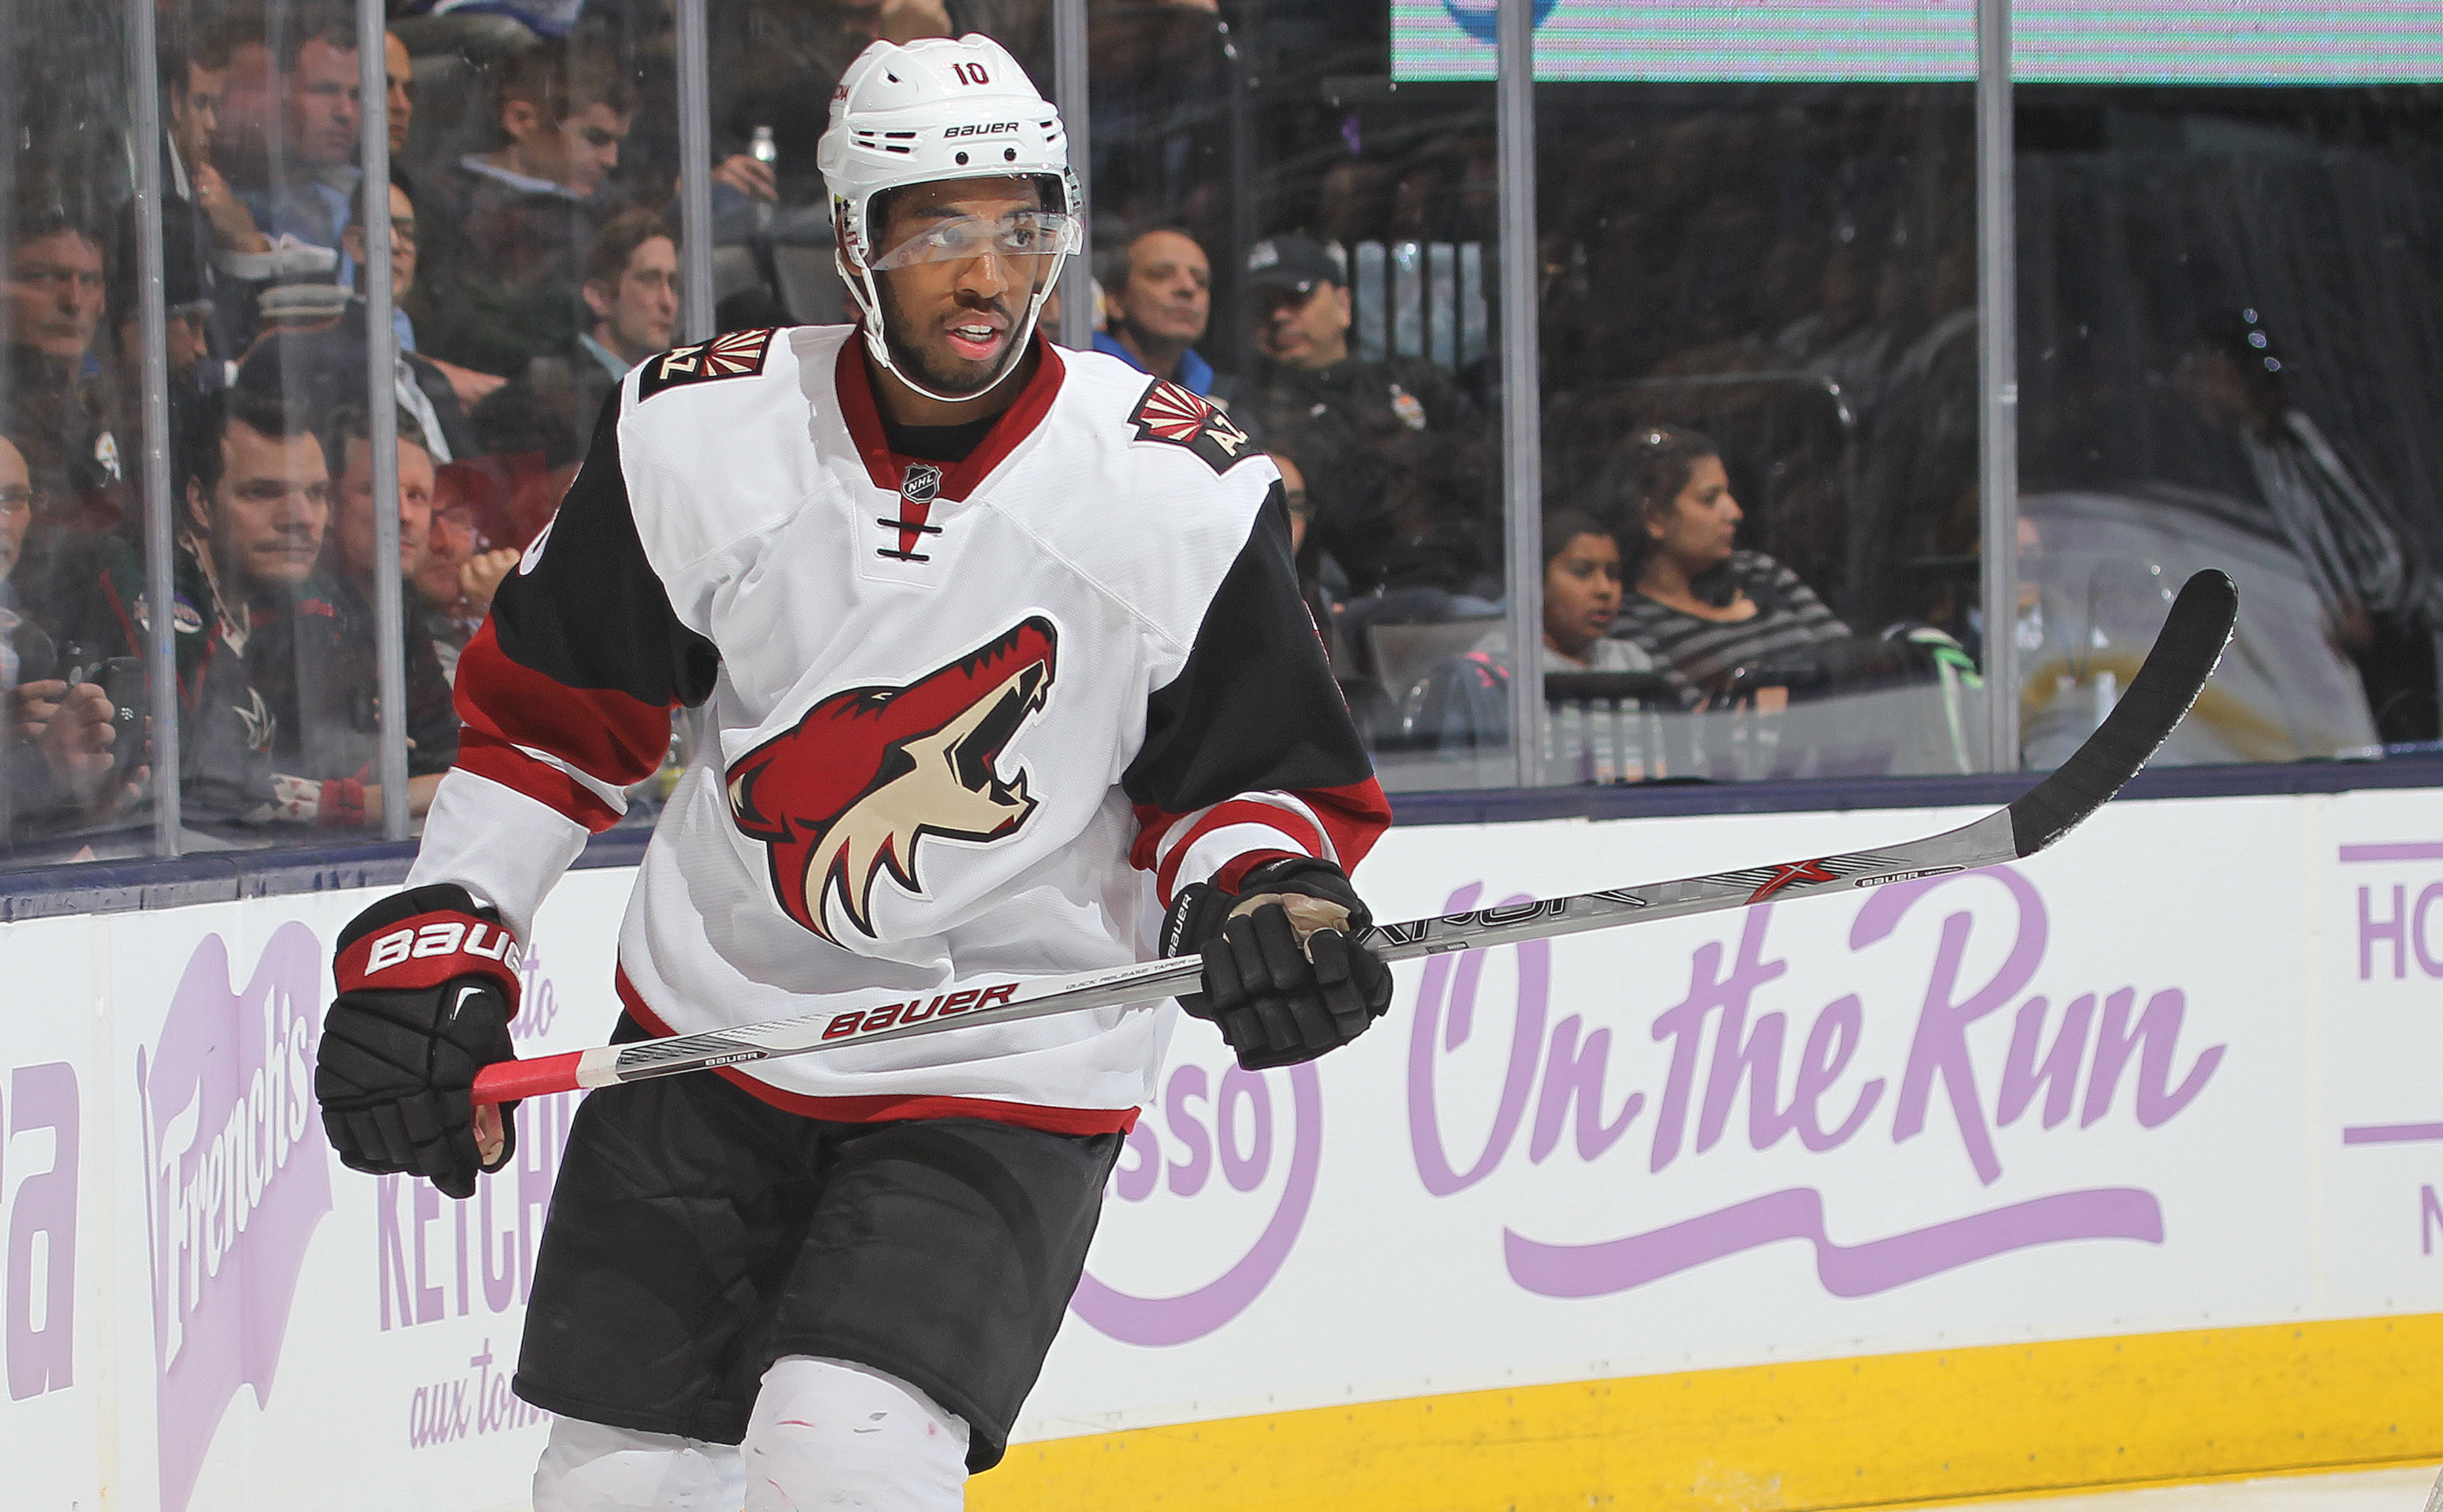 Anthony Duclair of the Arizona Coyotes skates against the Toronto Maple Leafs at the Air Canada Centre on Oct. 26, 2015. (Photo by Claus Andersen/Getty Images)